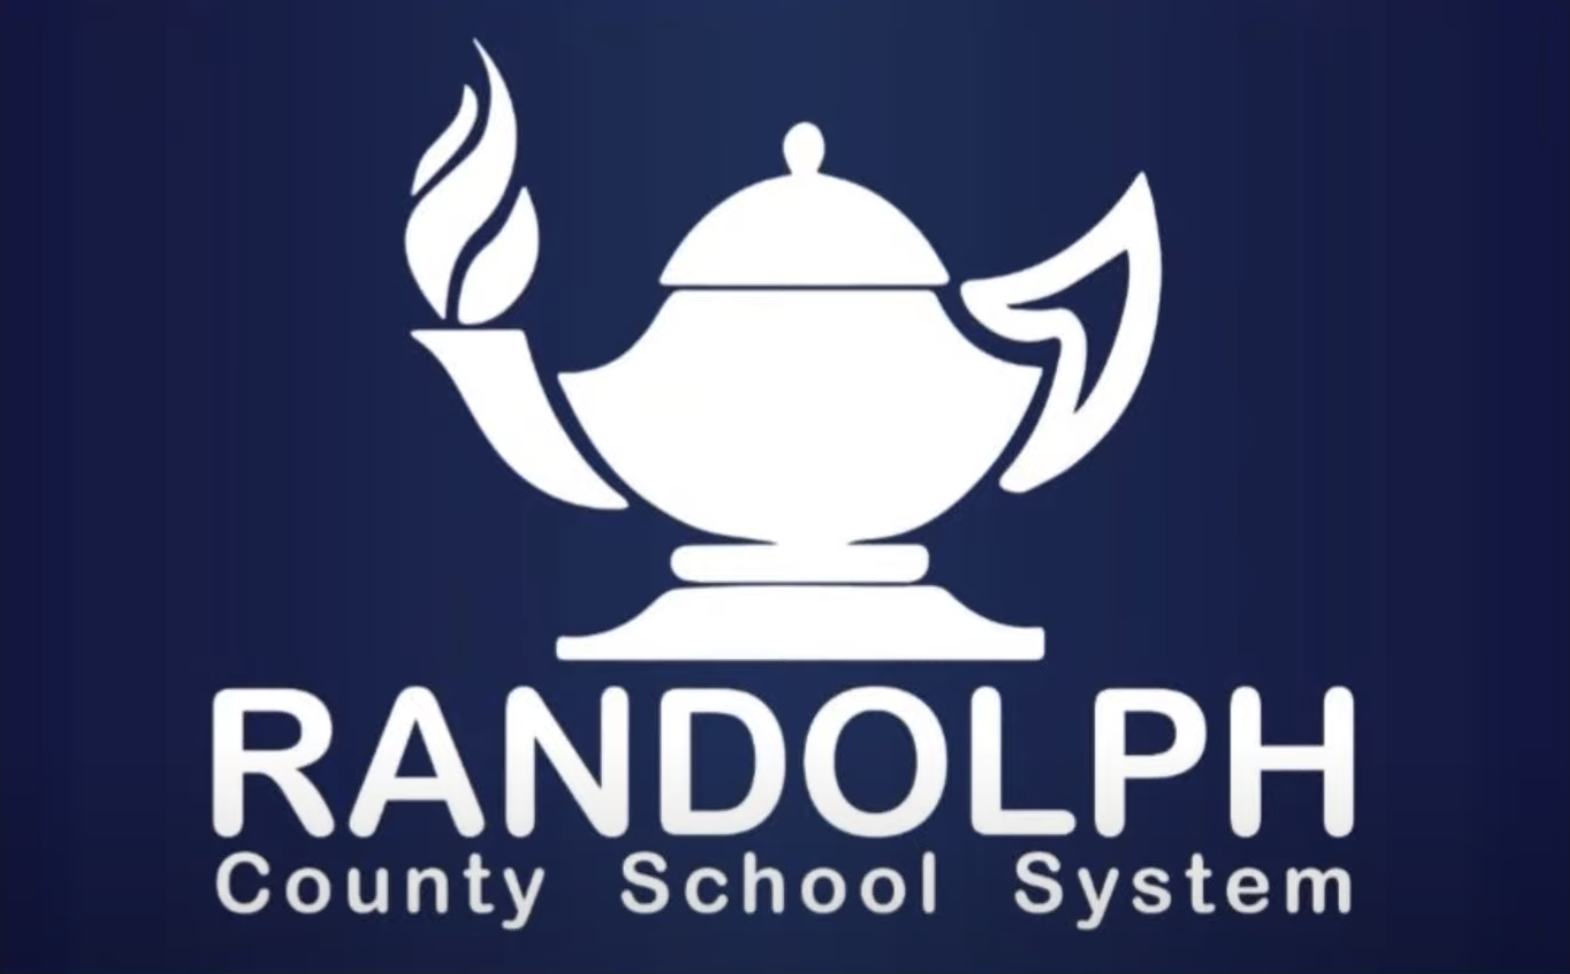 Board of Education approves changes to 2023 24 school calendar